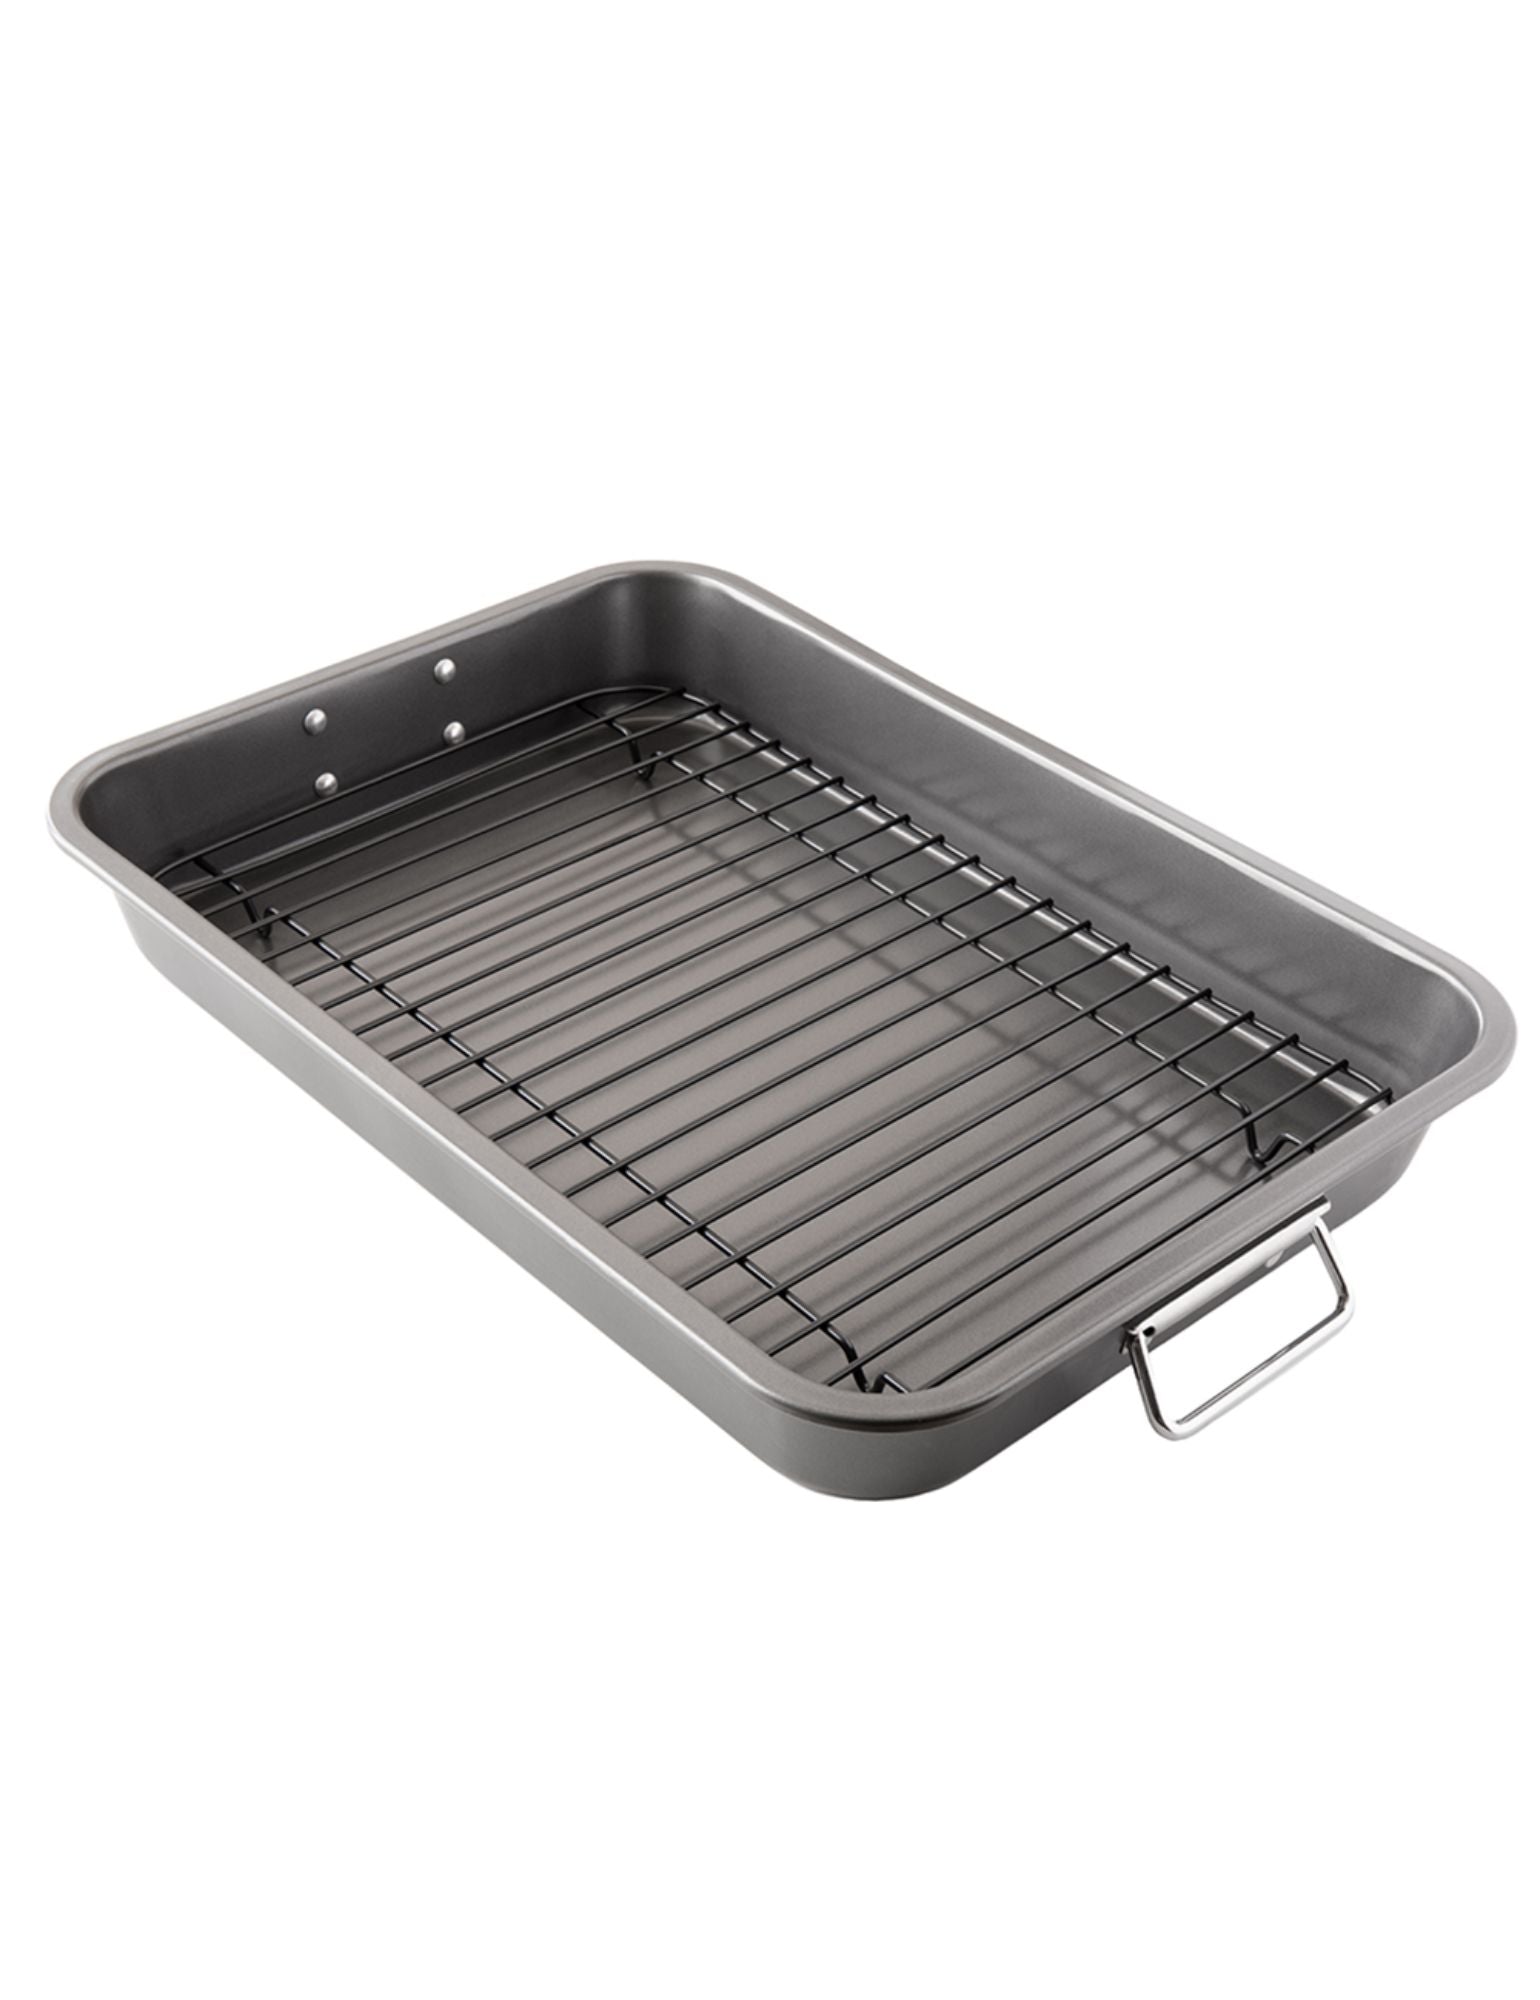 Chef Pomodoro Copper Crisper Tray, Air Fryer Tray for Oven, Deluxe Air Fry  in Your Oven, Oven Air Fryer Basket and Tray 2-Piece Set, Air Fryer Baking